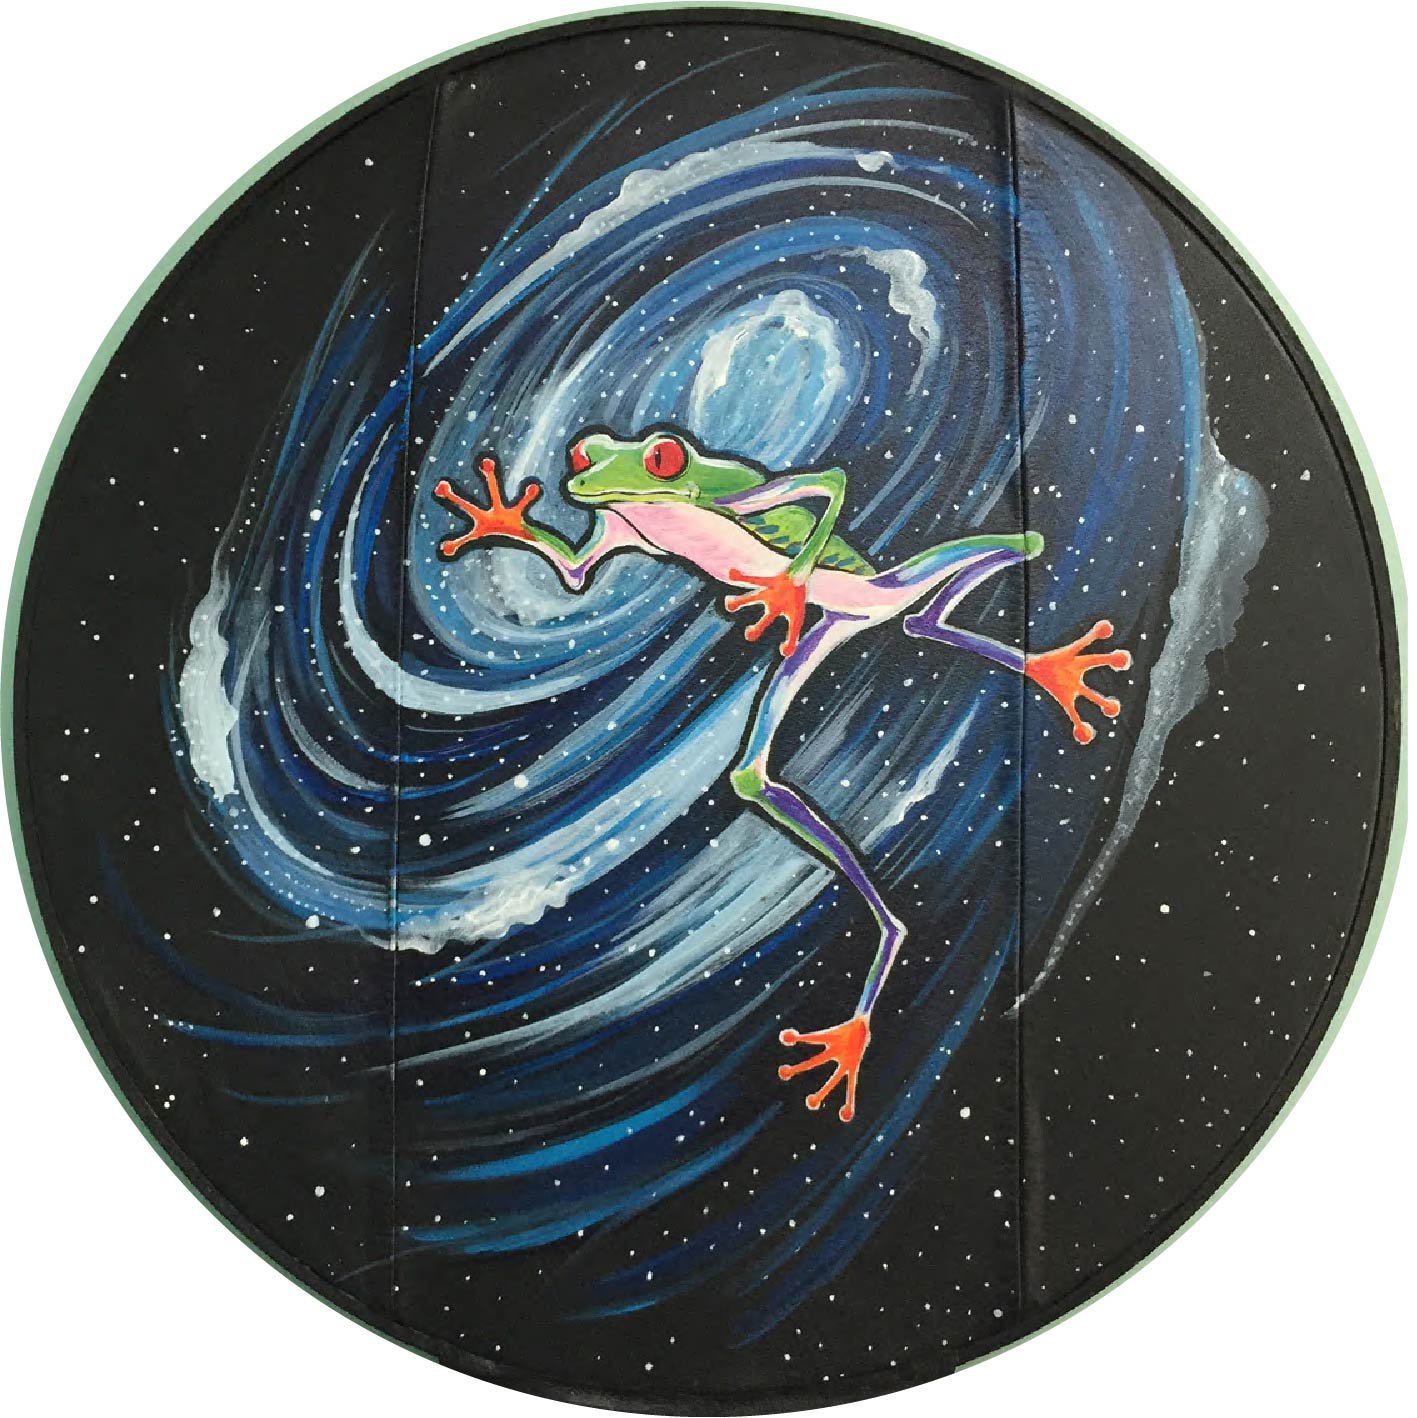 Commissioned Jumping Frog, Acrylic on Leather, Hoop  18"